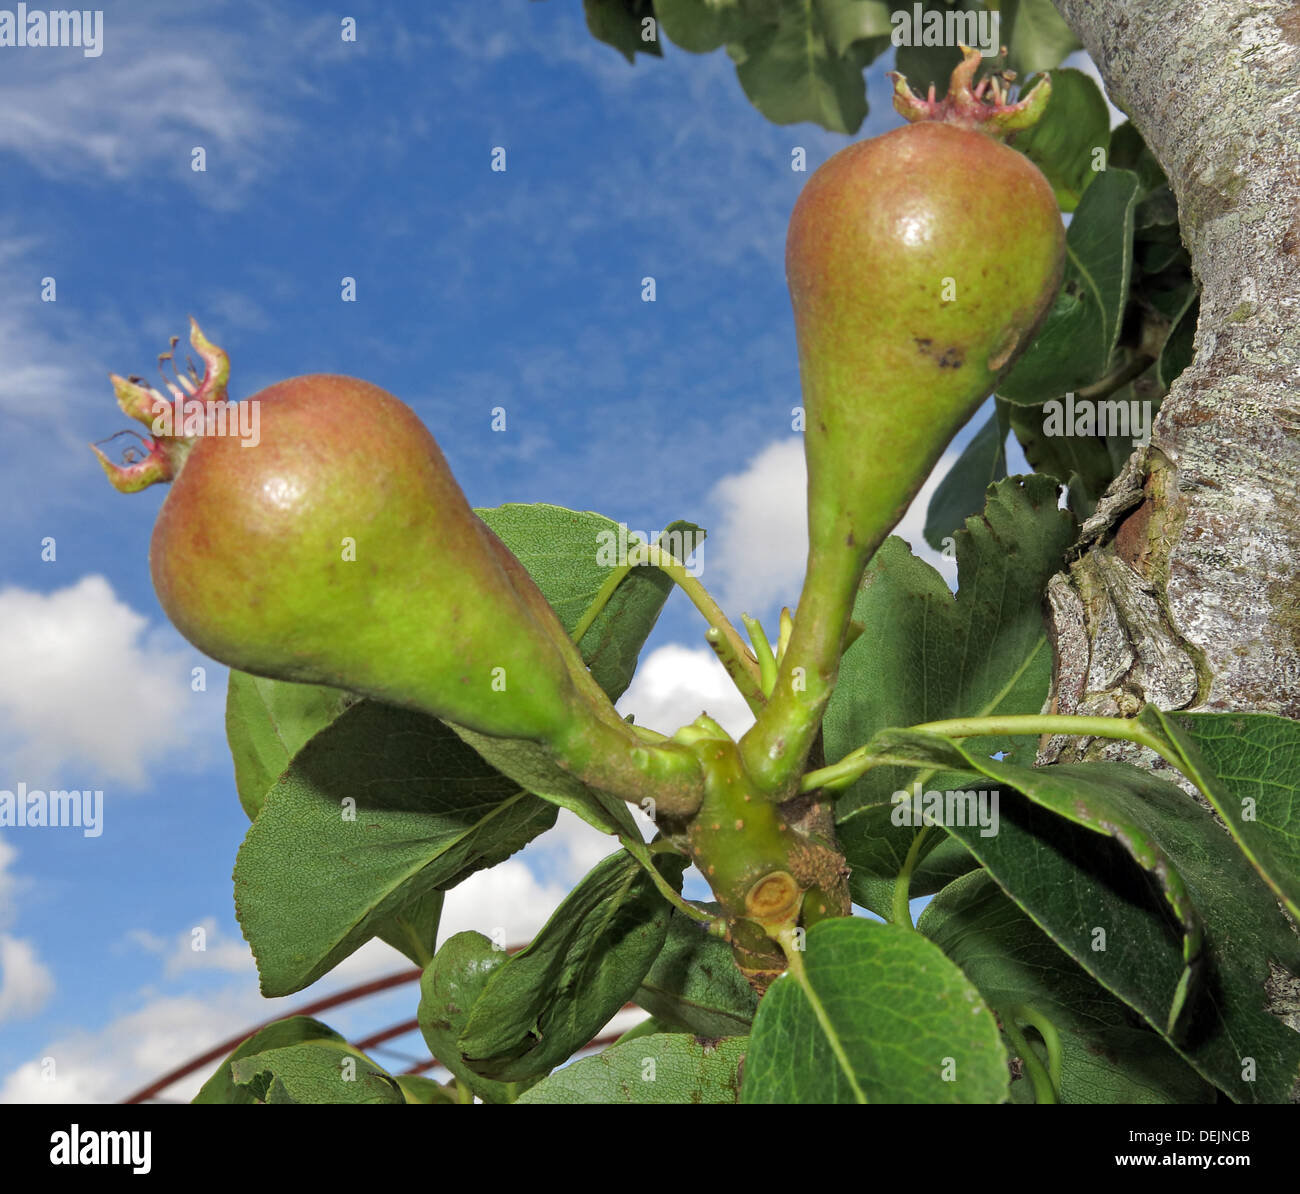 New summer pears growing on a mature tree at Barrington Ct near Ilminster, Somerset, England UK  TA19 0NQ in an orchard Stock Photo